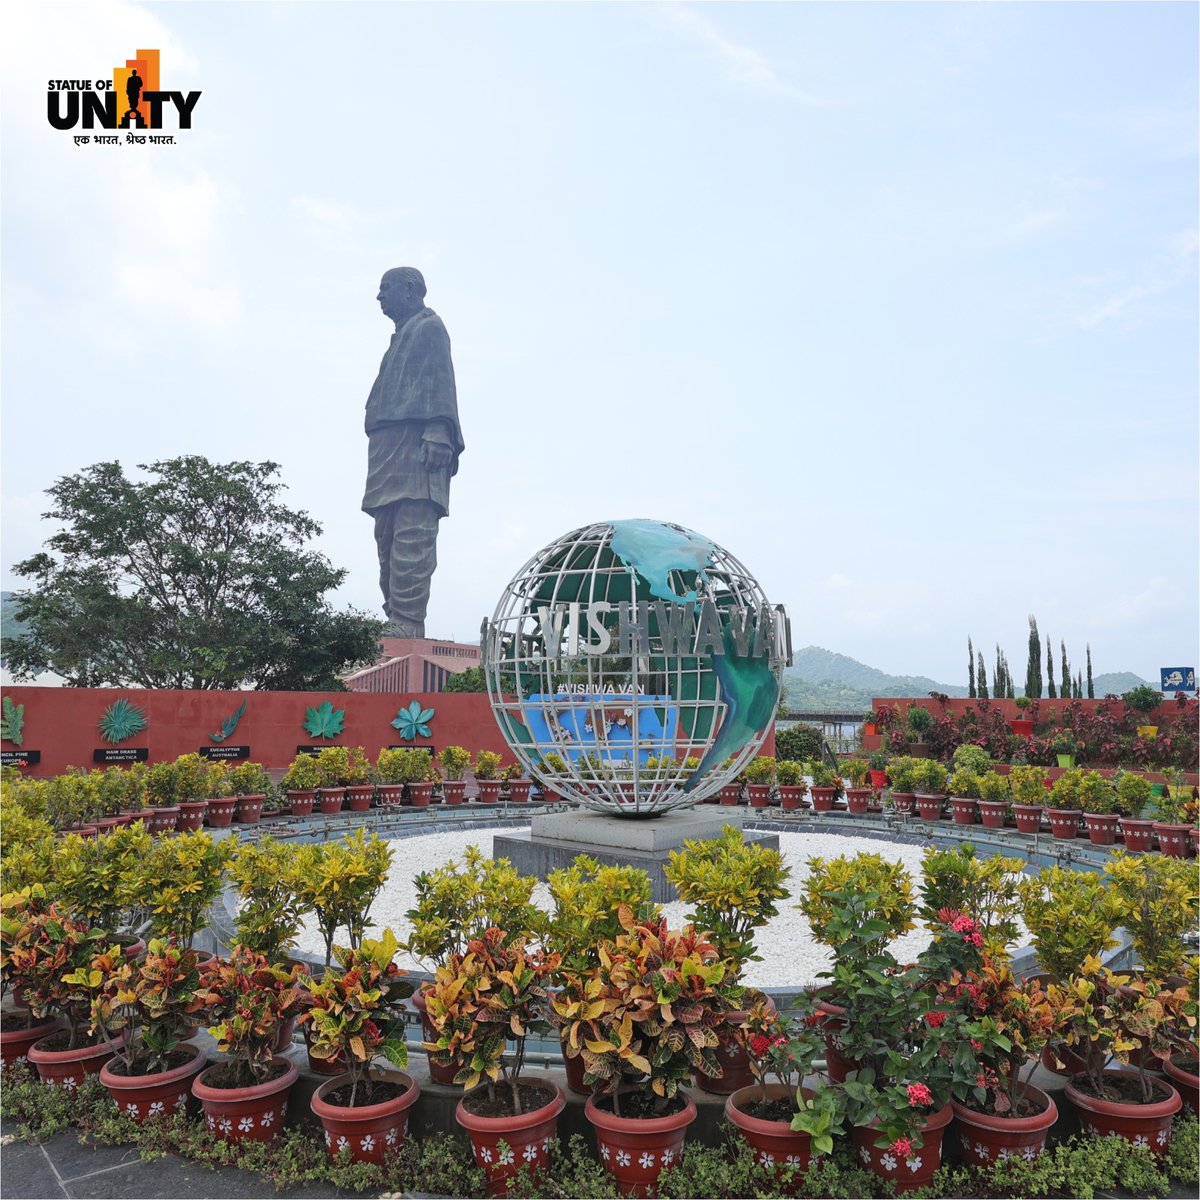 Come set foot on a journey through the enchanting #VishwaVan  – where nature's tranquility meets the grandeur of the #StatueOfUnity 

Plan your visit now and find your serene escape in #EktaNagar's embrace. 

#NatureRetreat